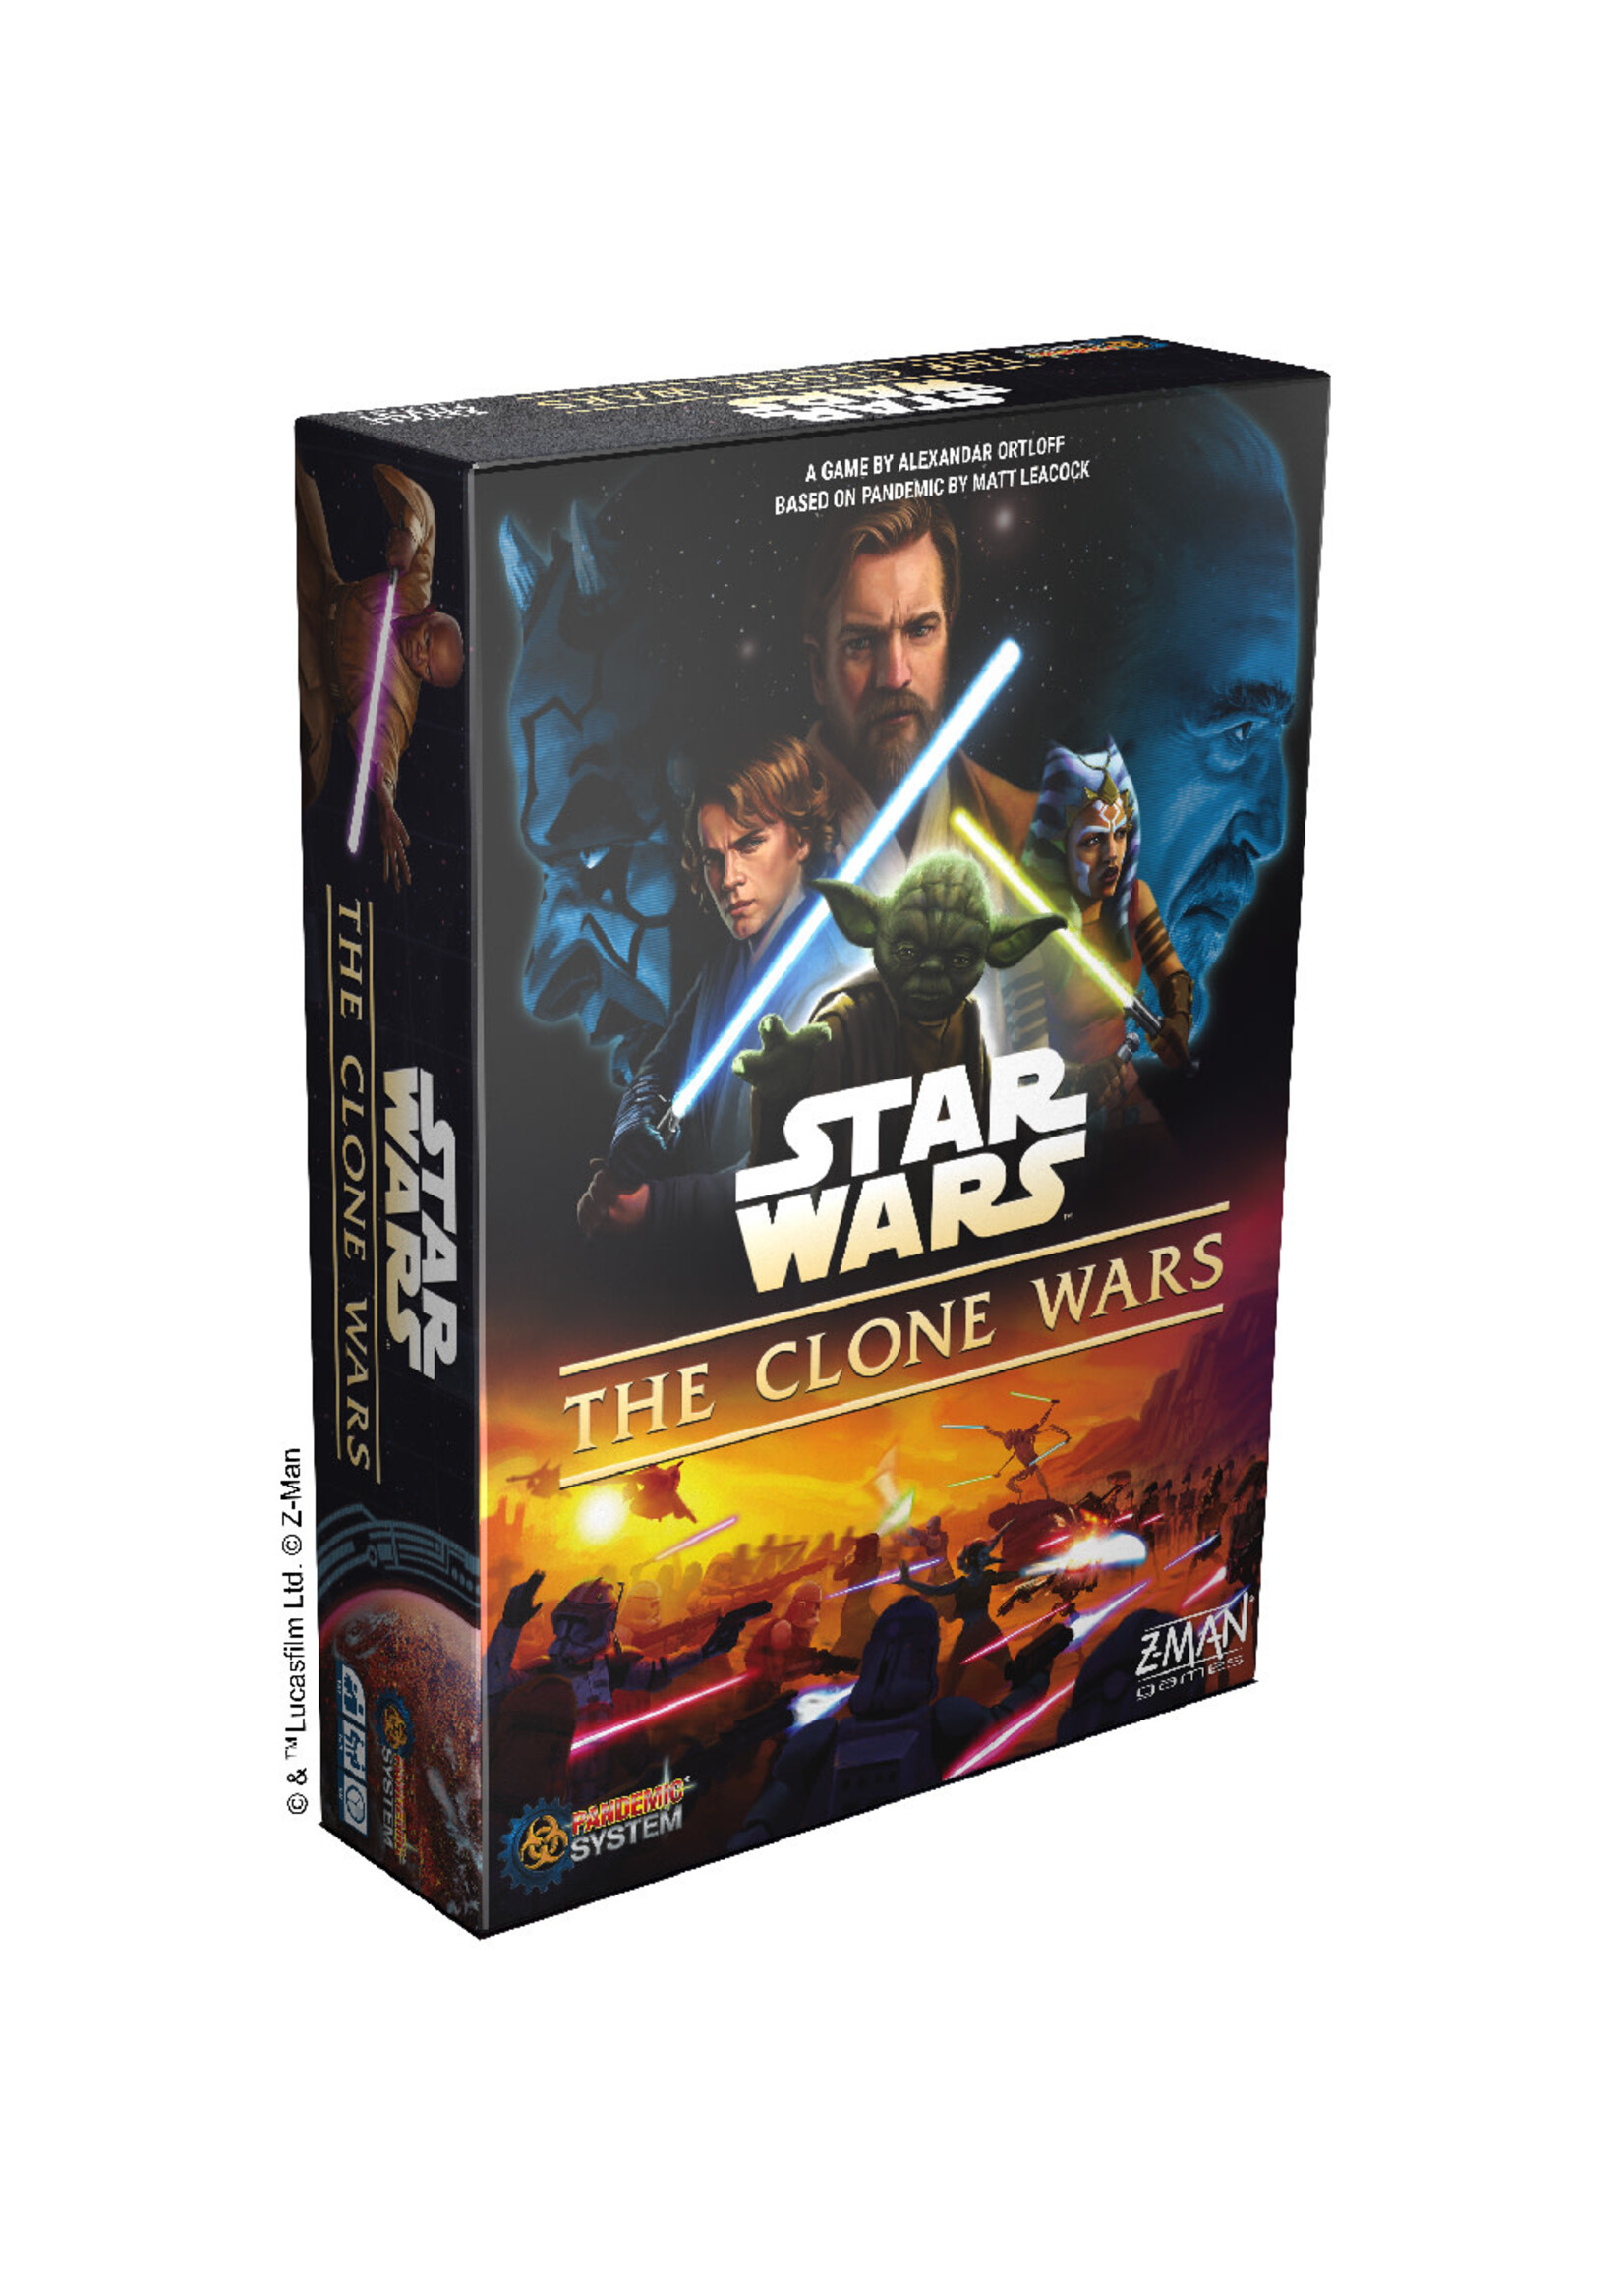 Z-Man Games Star Wars: The Clone Wars - A Pandemic System Game